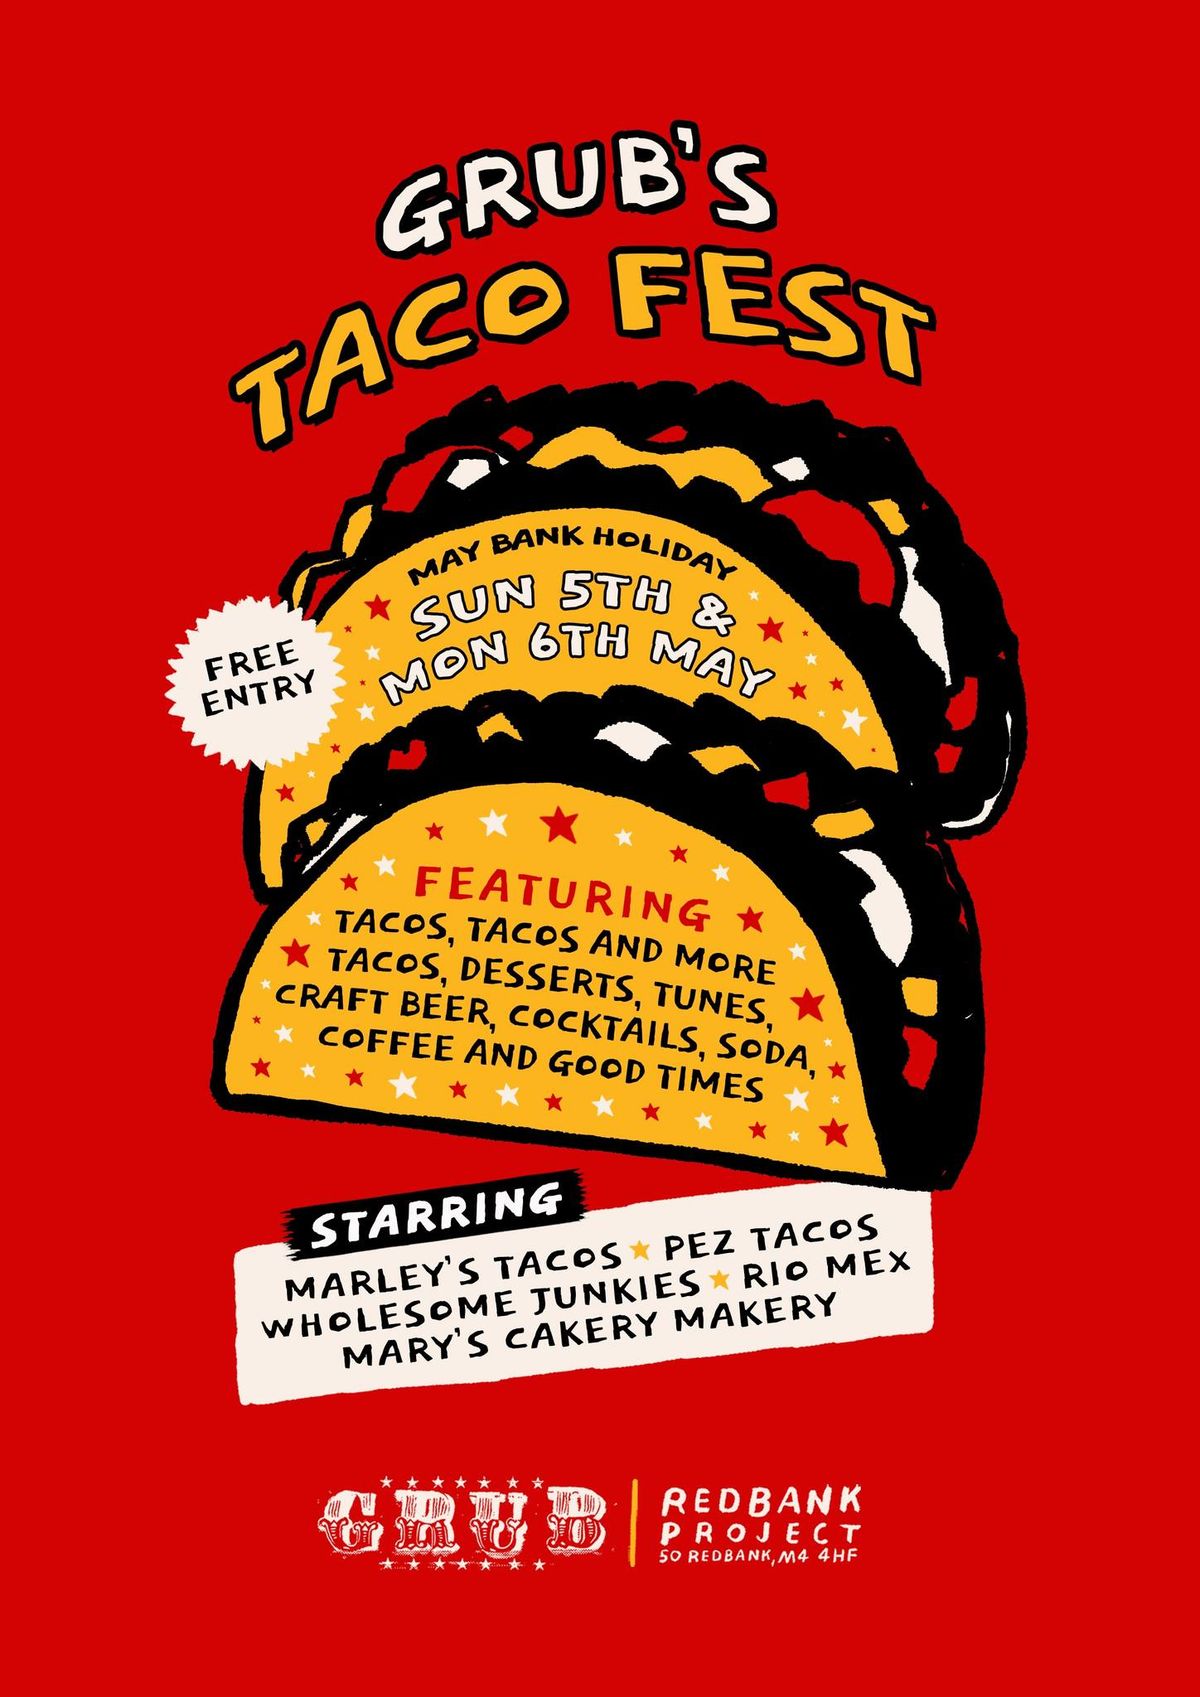 TACO FEST presented by GRUB MANCHESTER